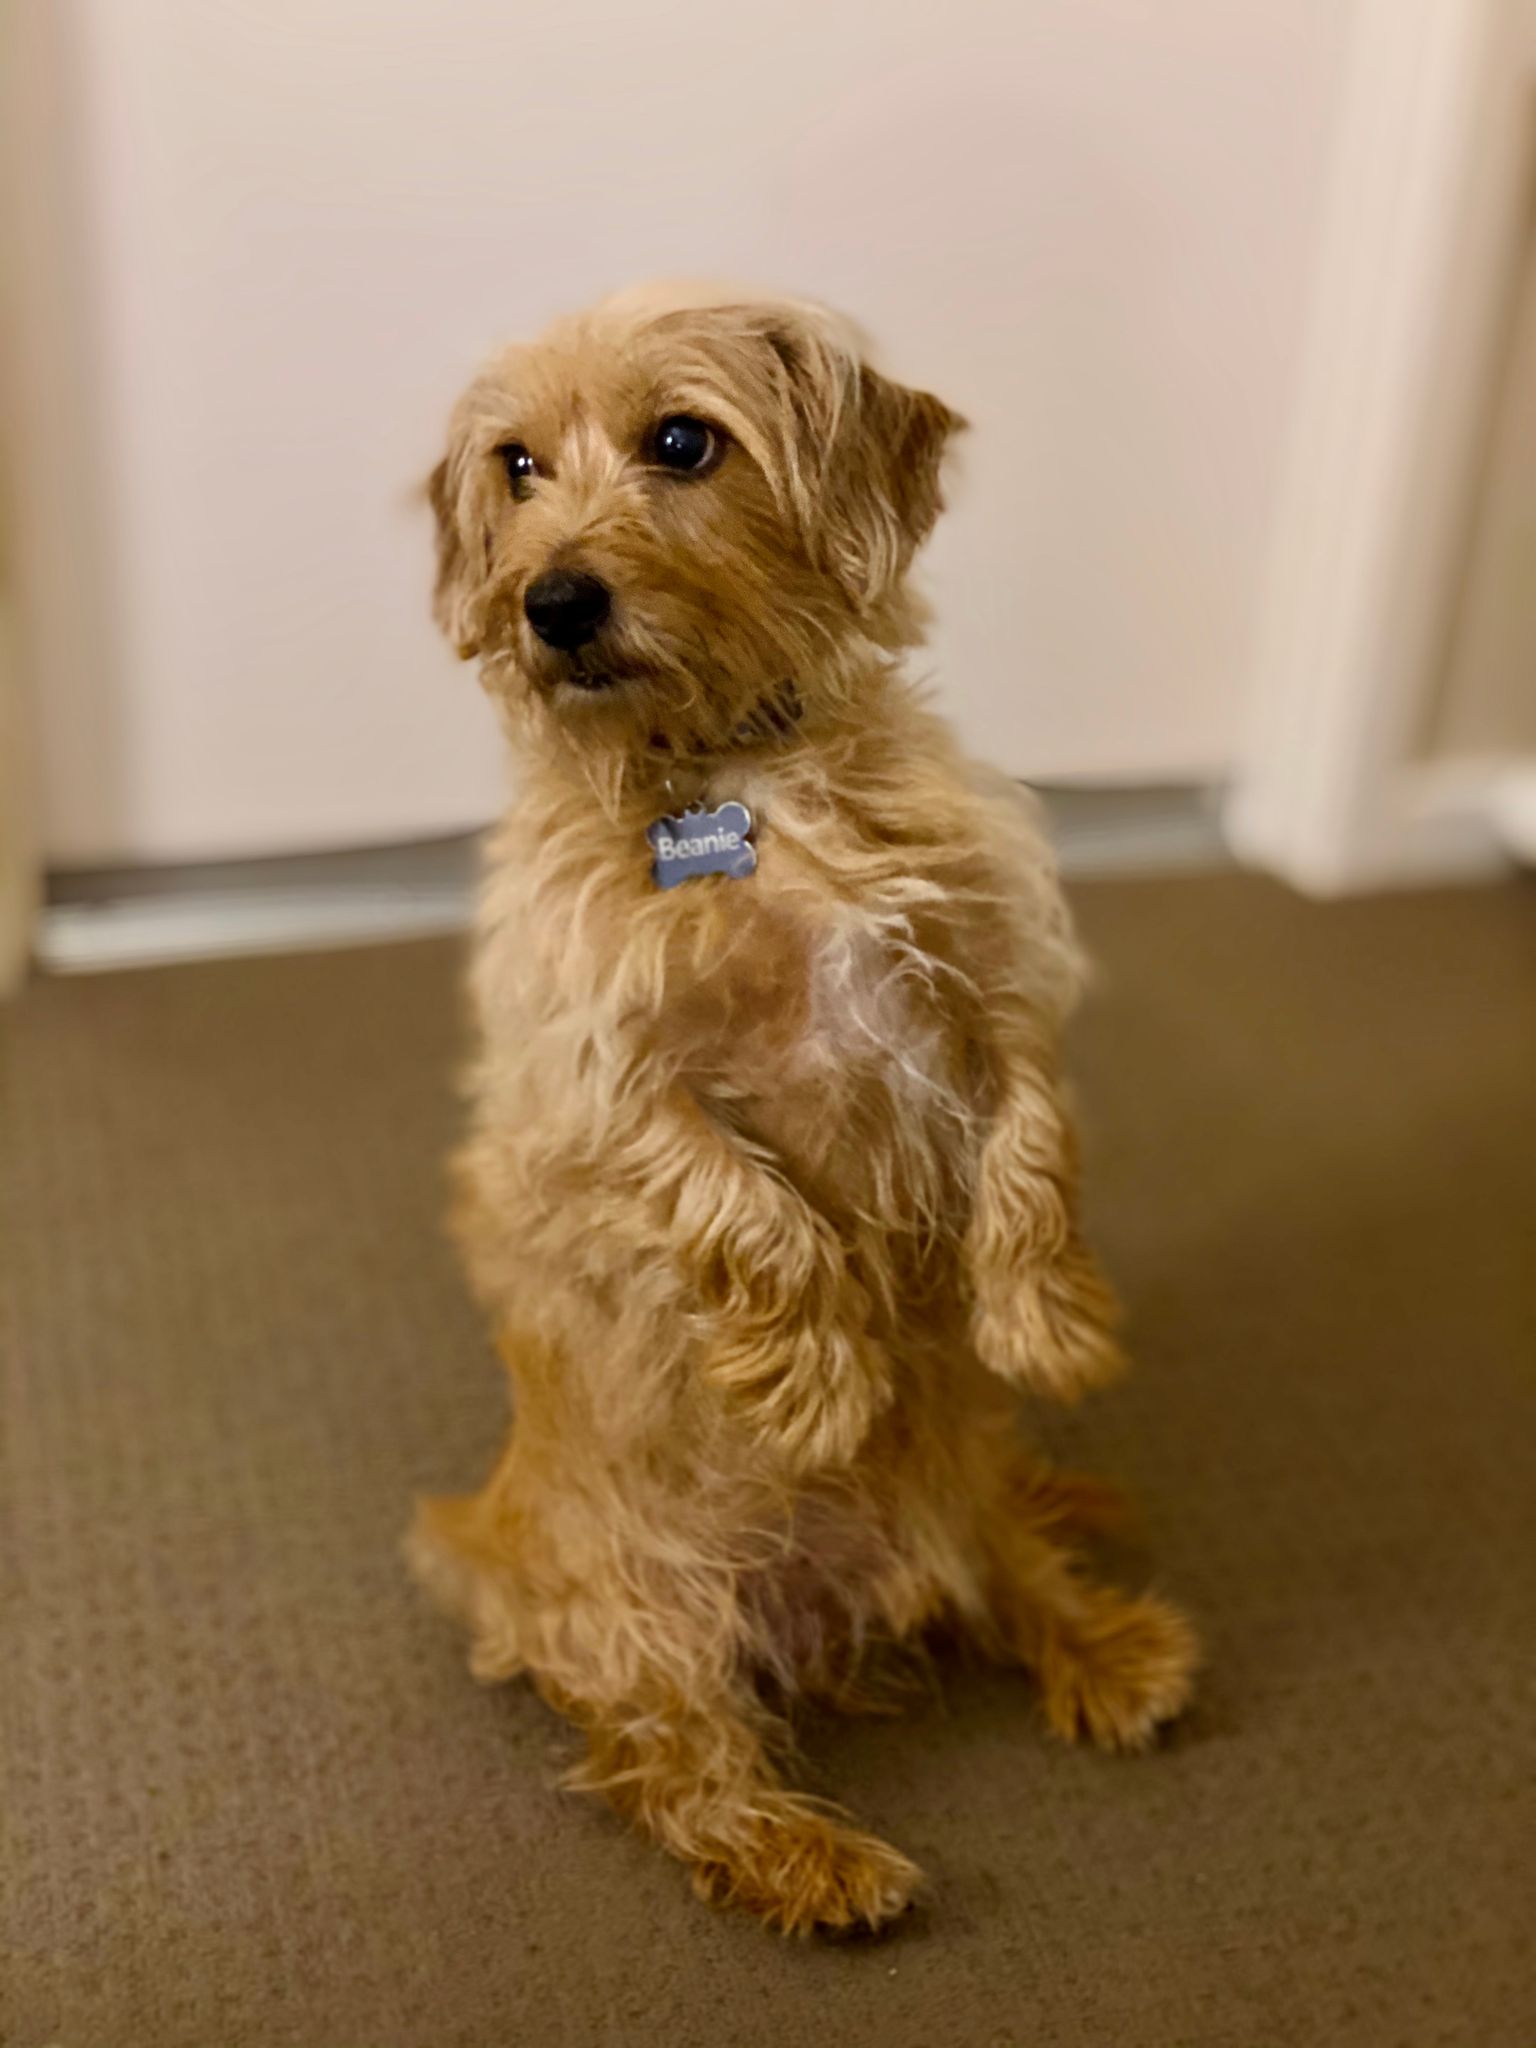 A photo of a small scruffy blonde dog sitting up on his haunches.